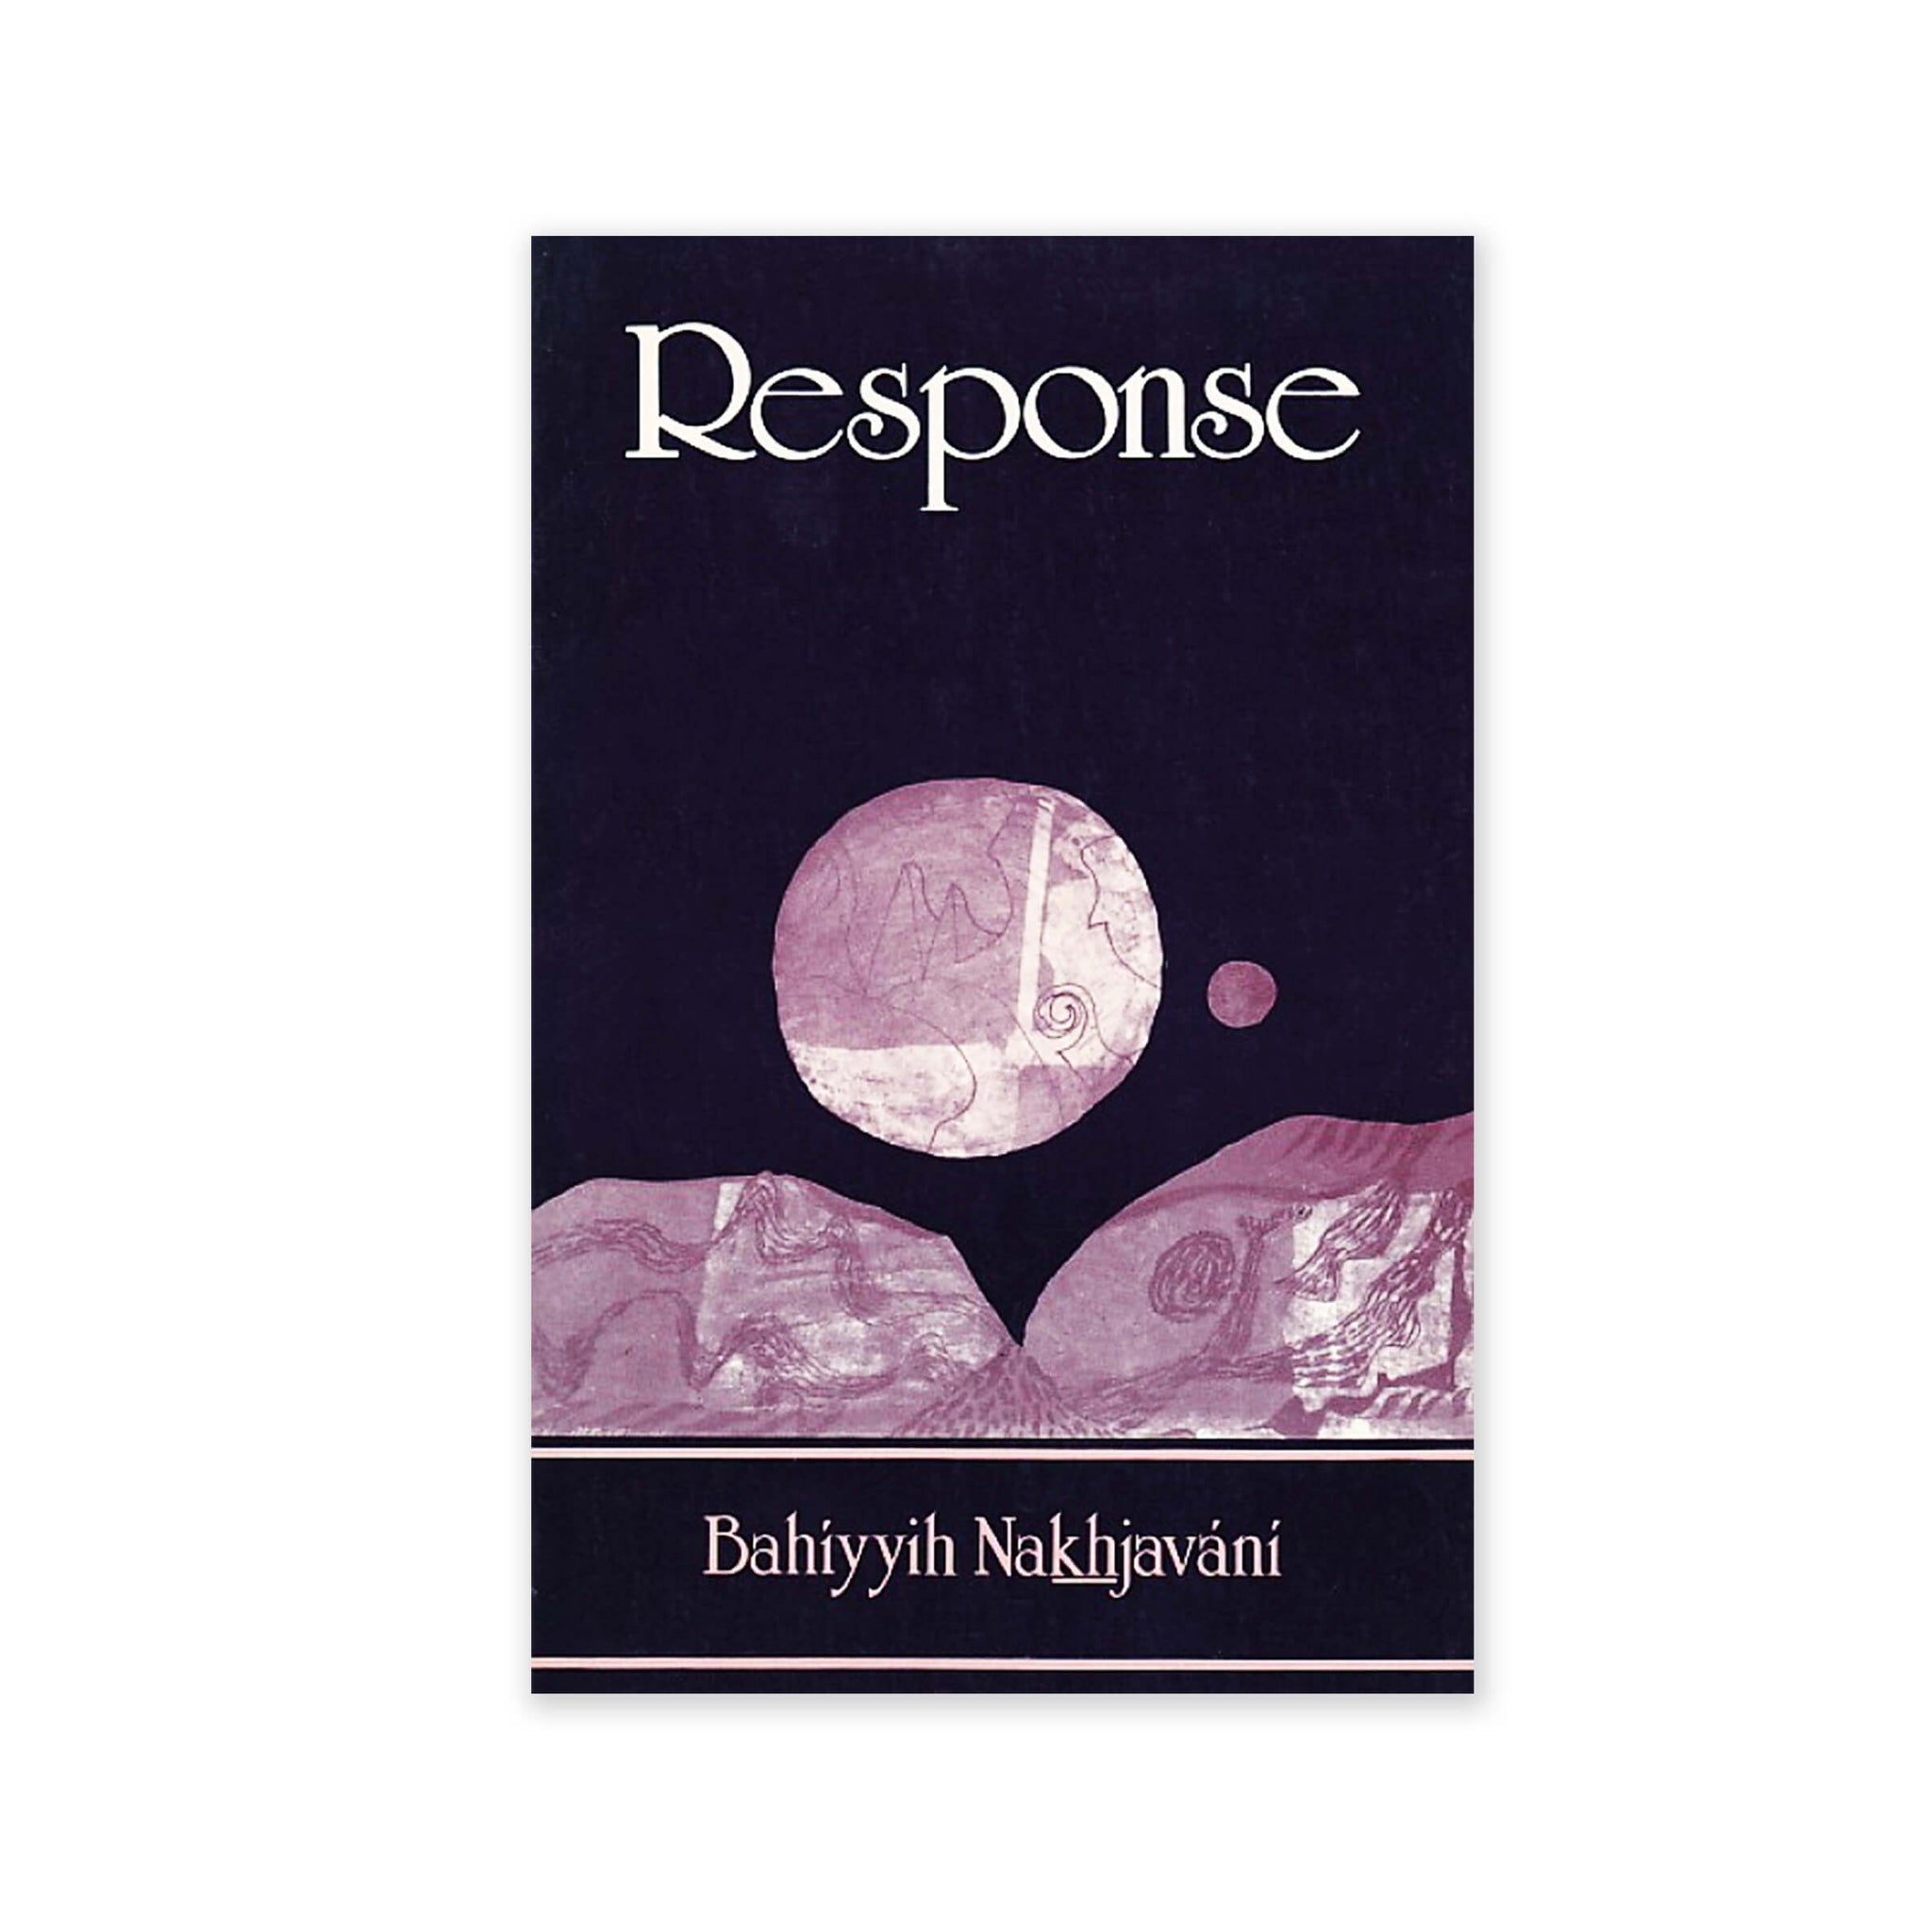 Response - An Exploration in the Baha'i Writings of the Dual Nature of Human Relationships